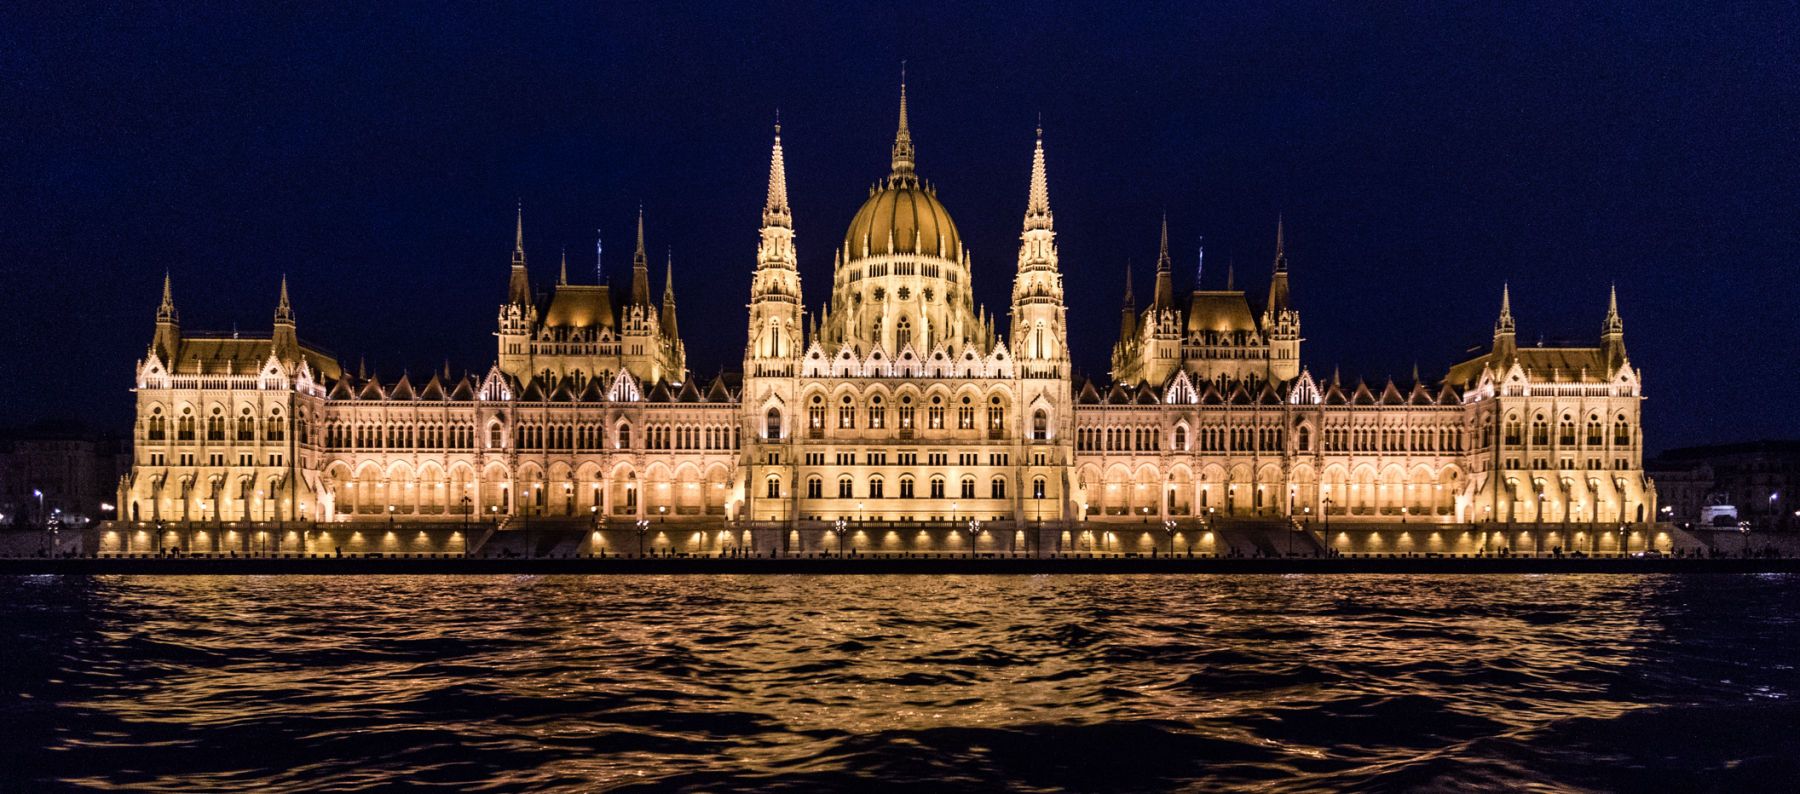 The Parlimant Building in Budapest, Hungary at night.